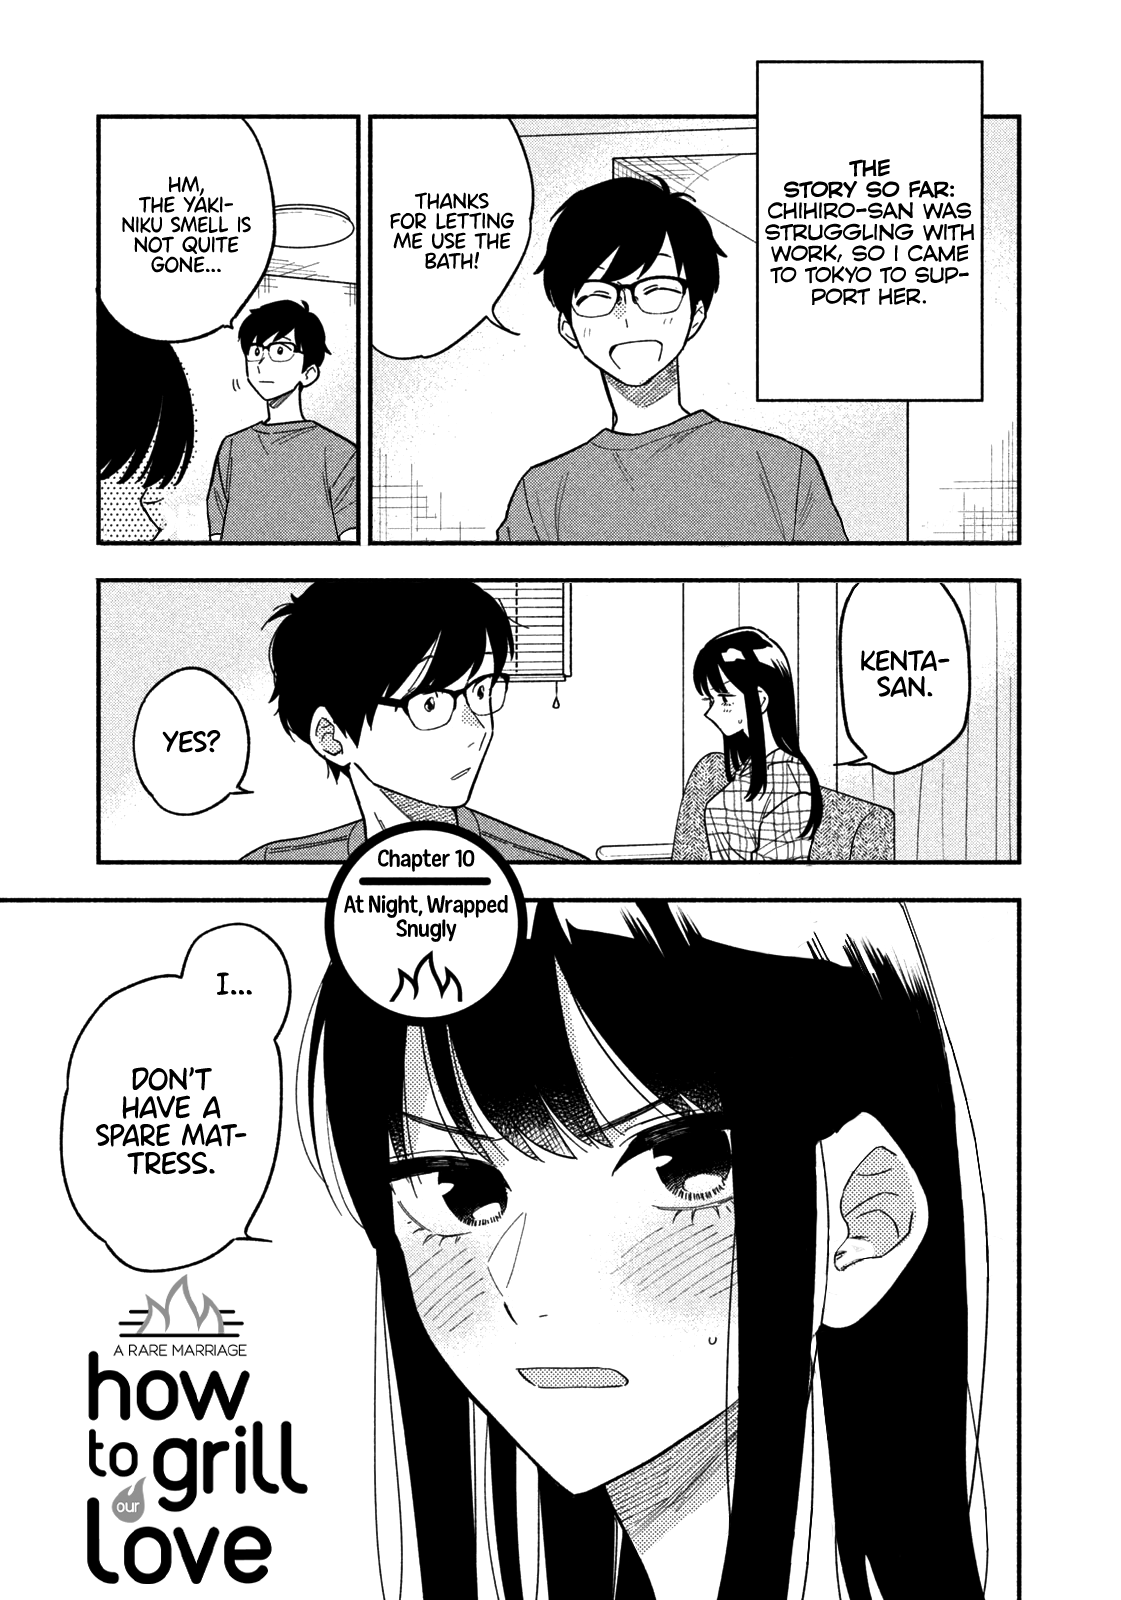 A Rare Marriage: How To Grill Our Love Chapter 10 #2